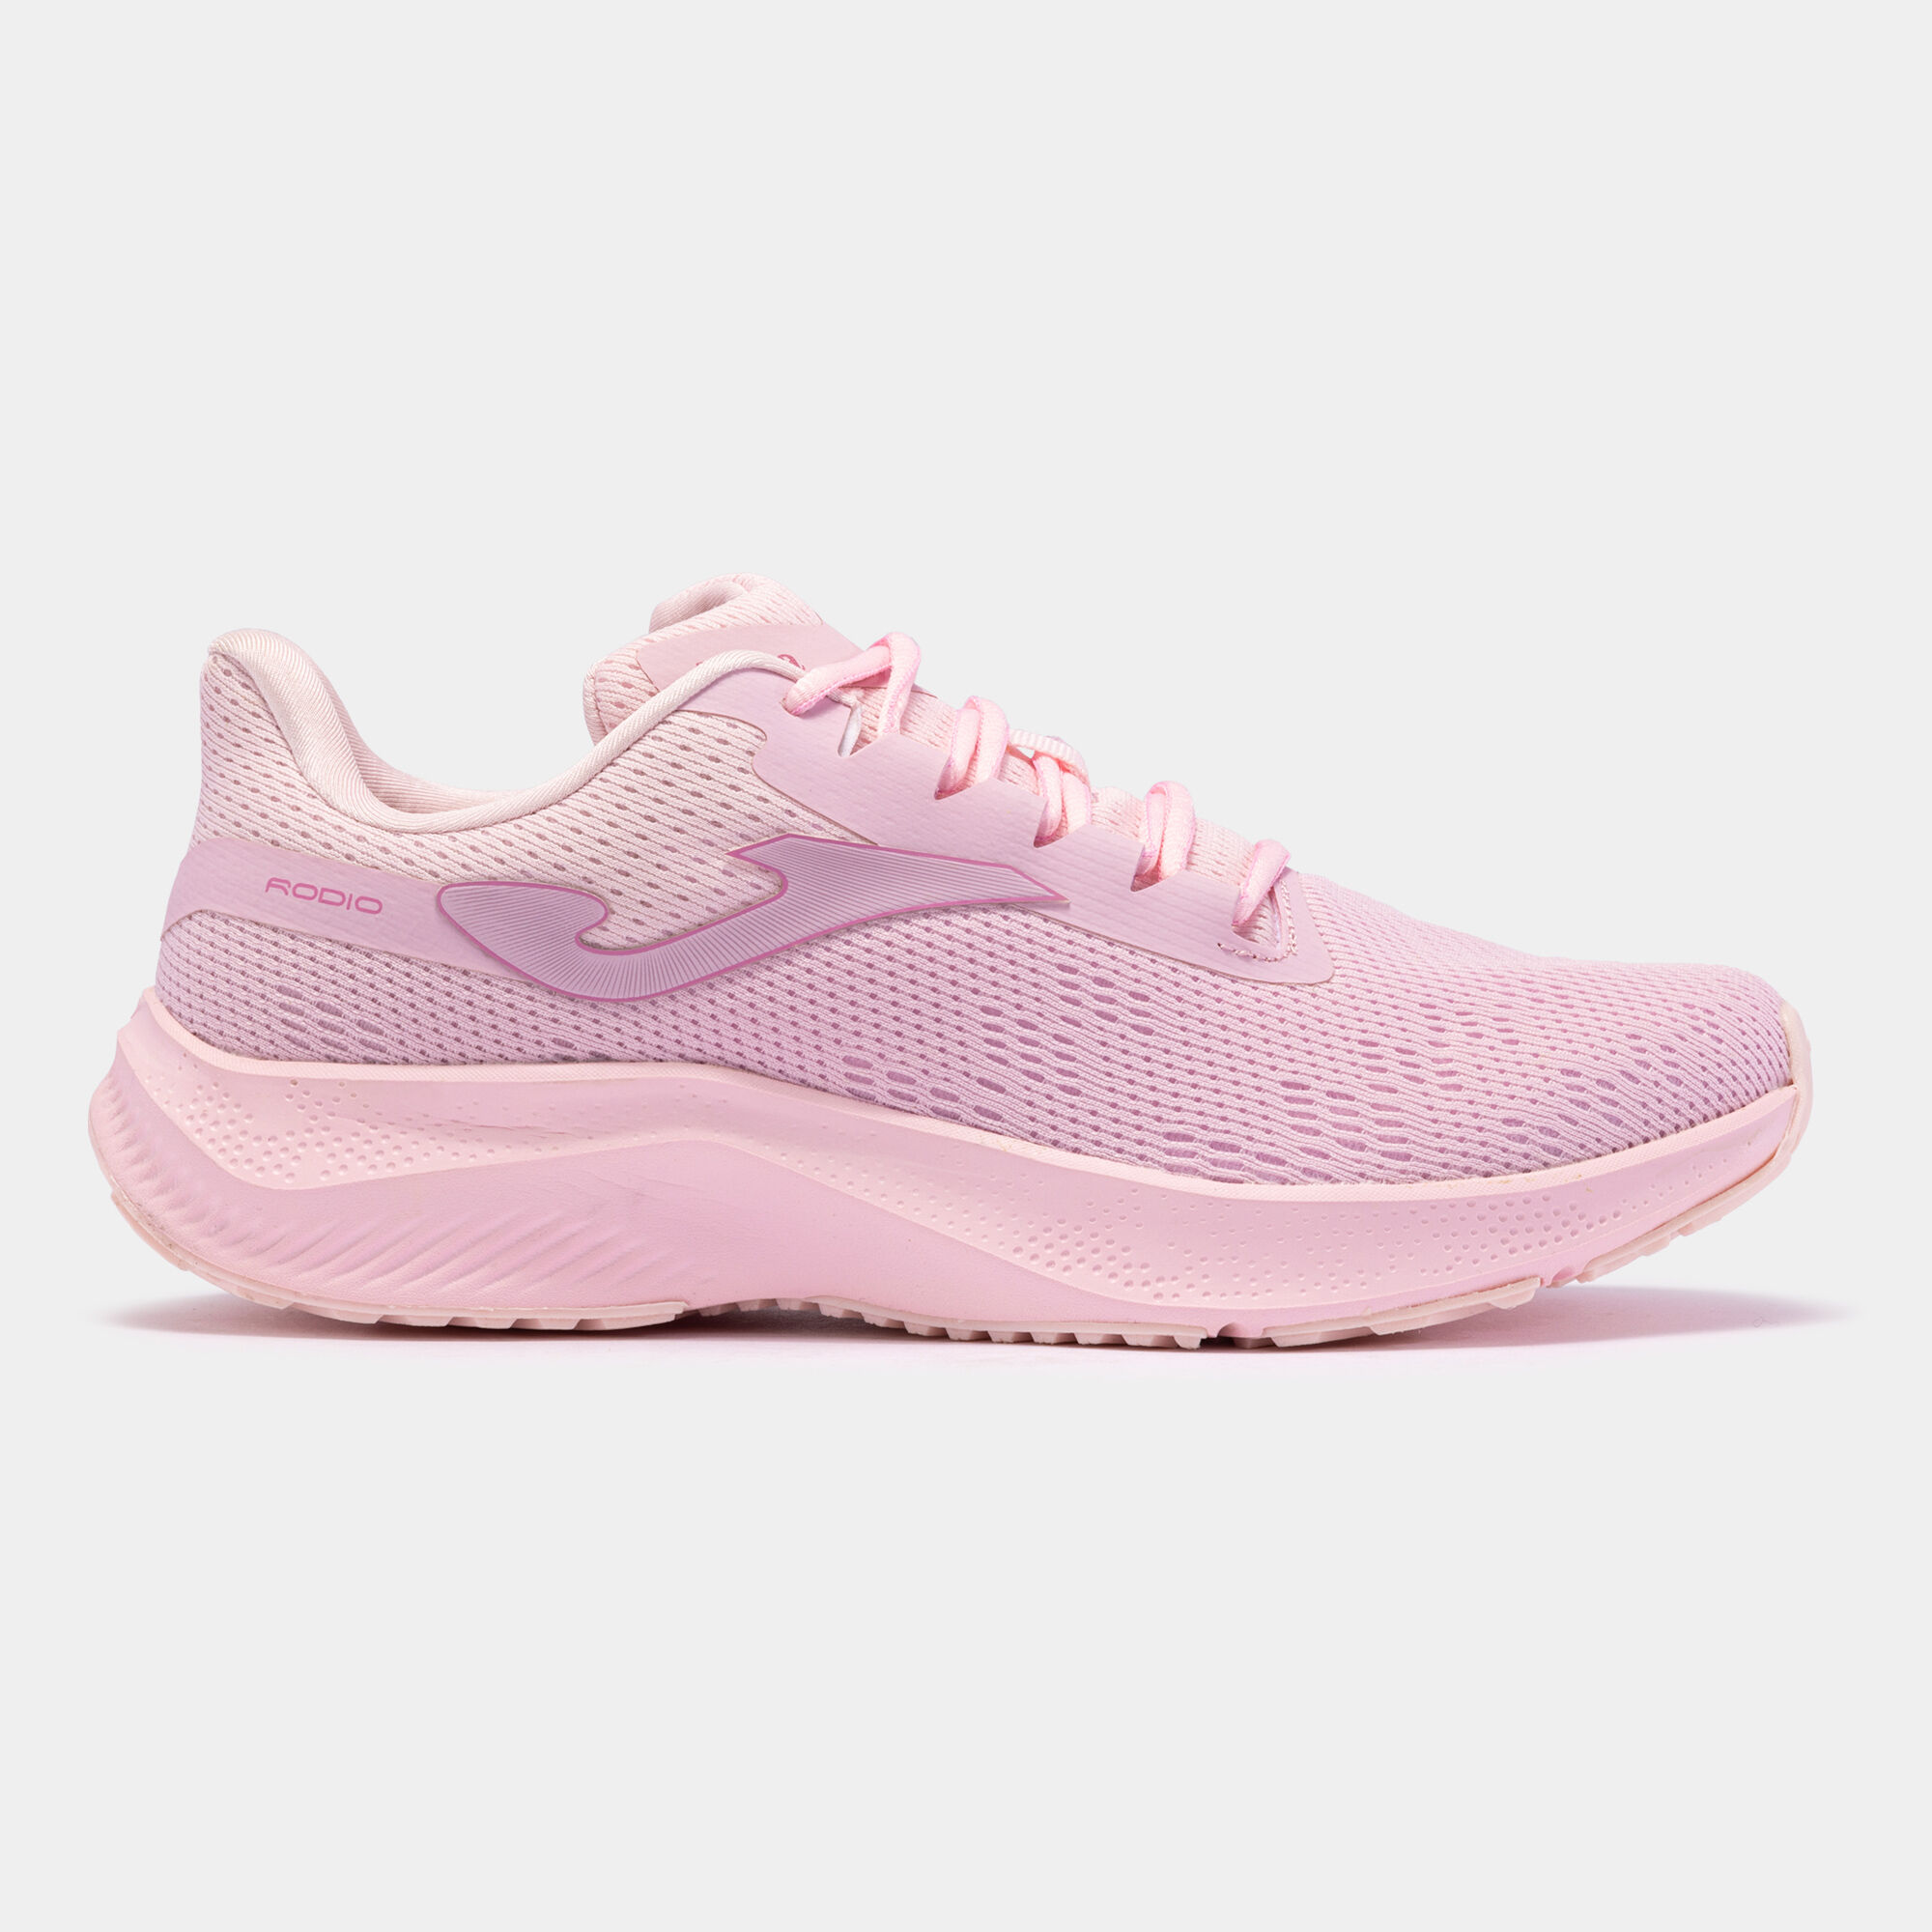 Running shoes Rodio 22 woman pink